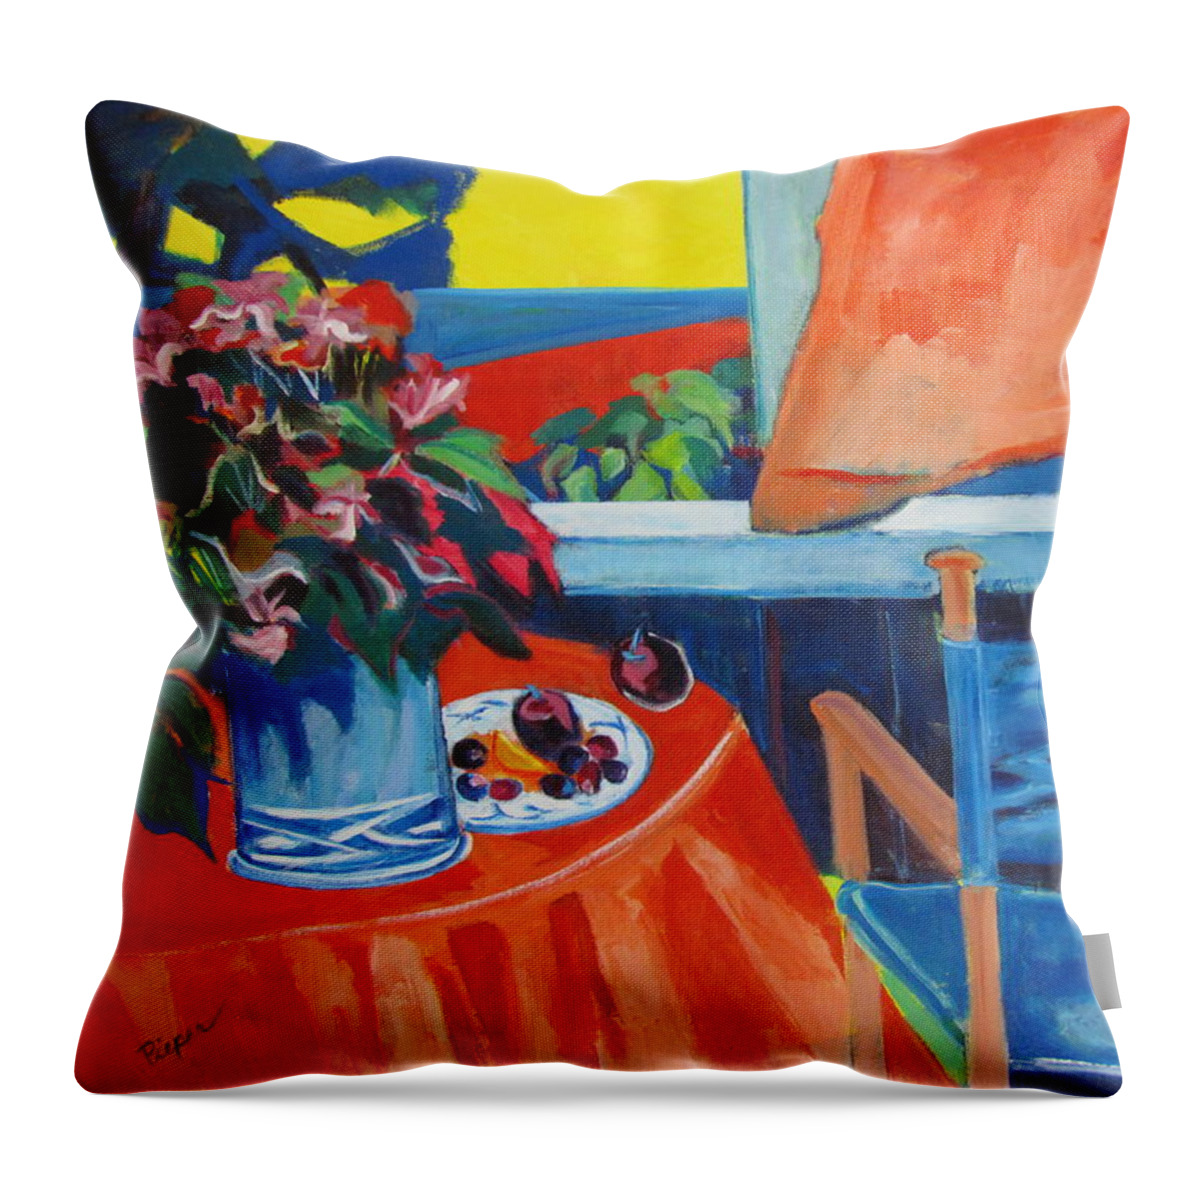 Blue Canvas Chair Throw Pillow featuring the painting Blue Canvas Chair by Betty Pieper